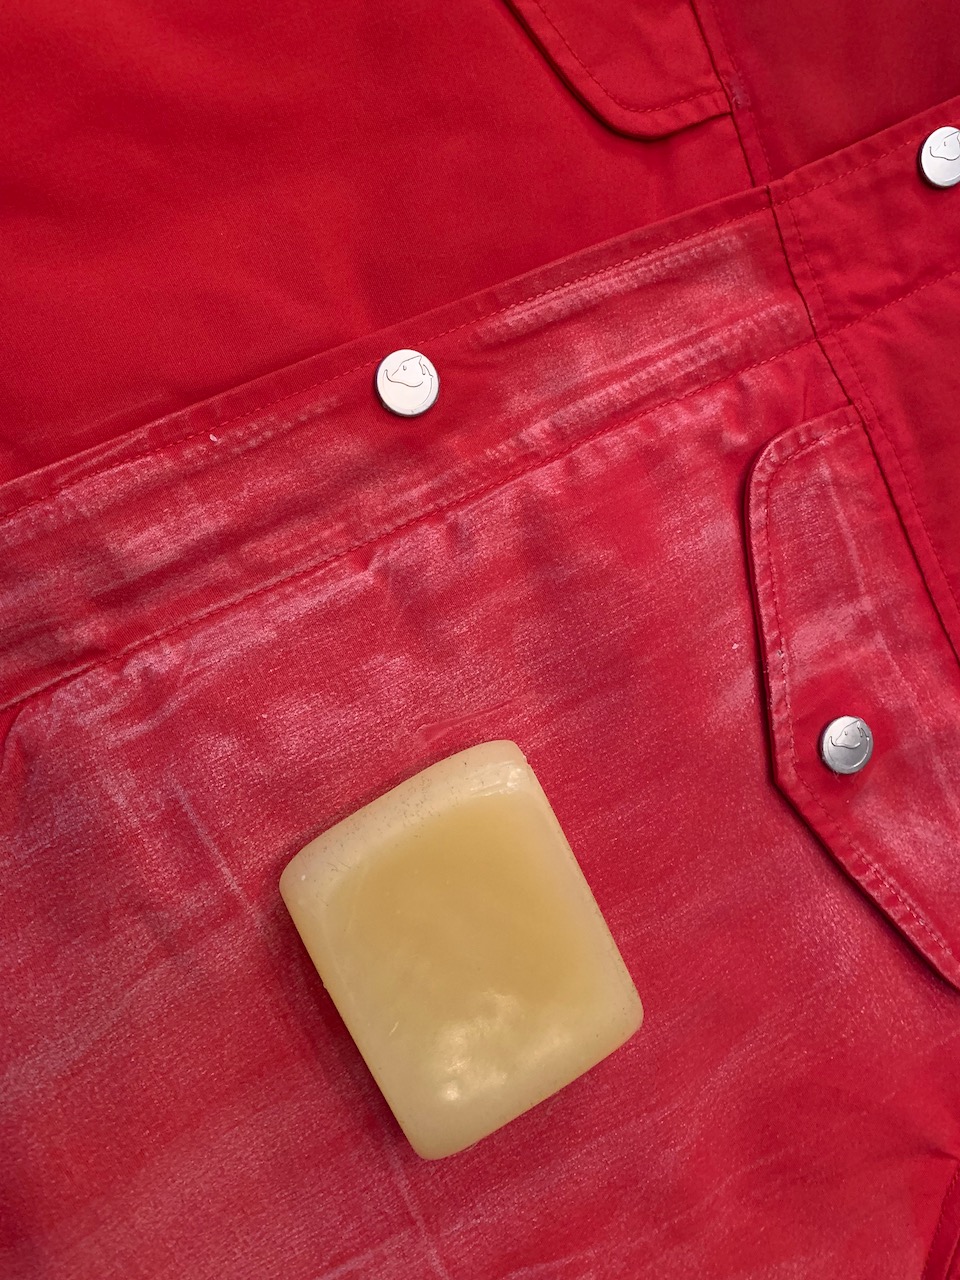 A red jacket with half of it waxed